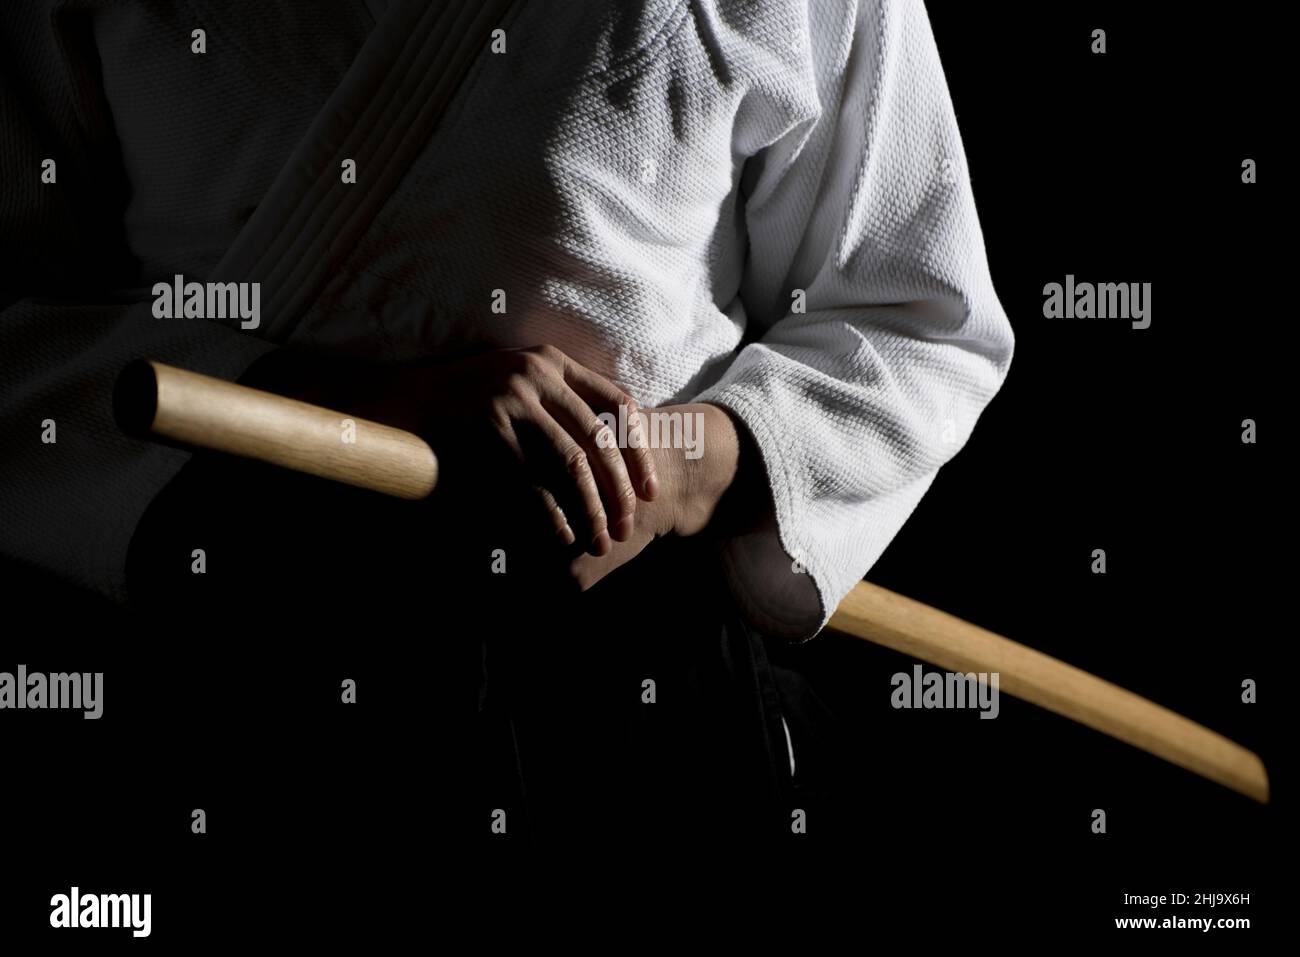 Aikido hakama, japanese martial arts uniform on black background. Shallow depth of field. SDF. A girl in black hakama standing in fighting pose with w Stock Photo